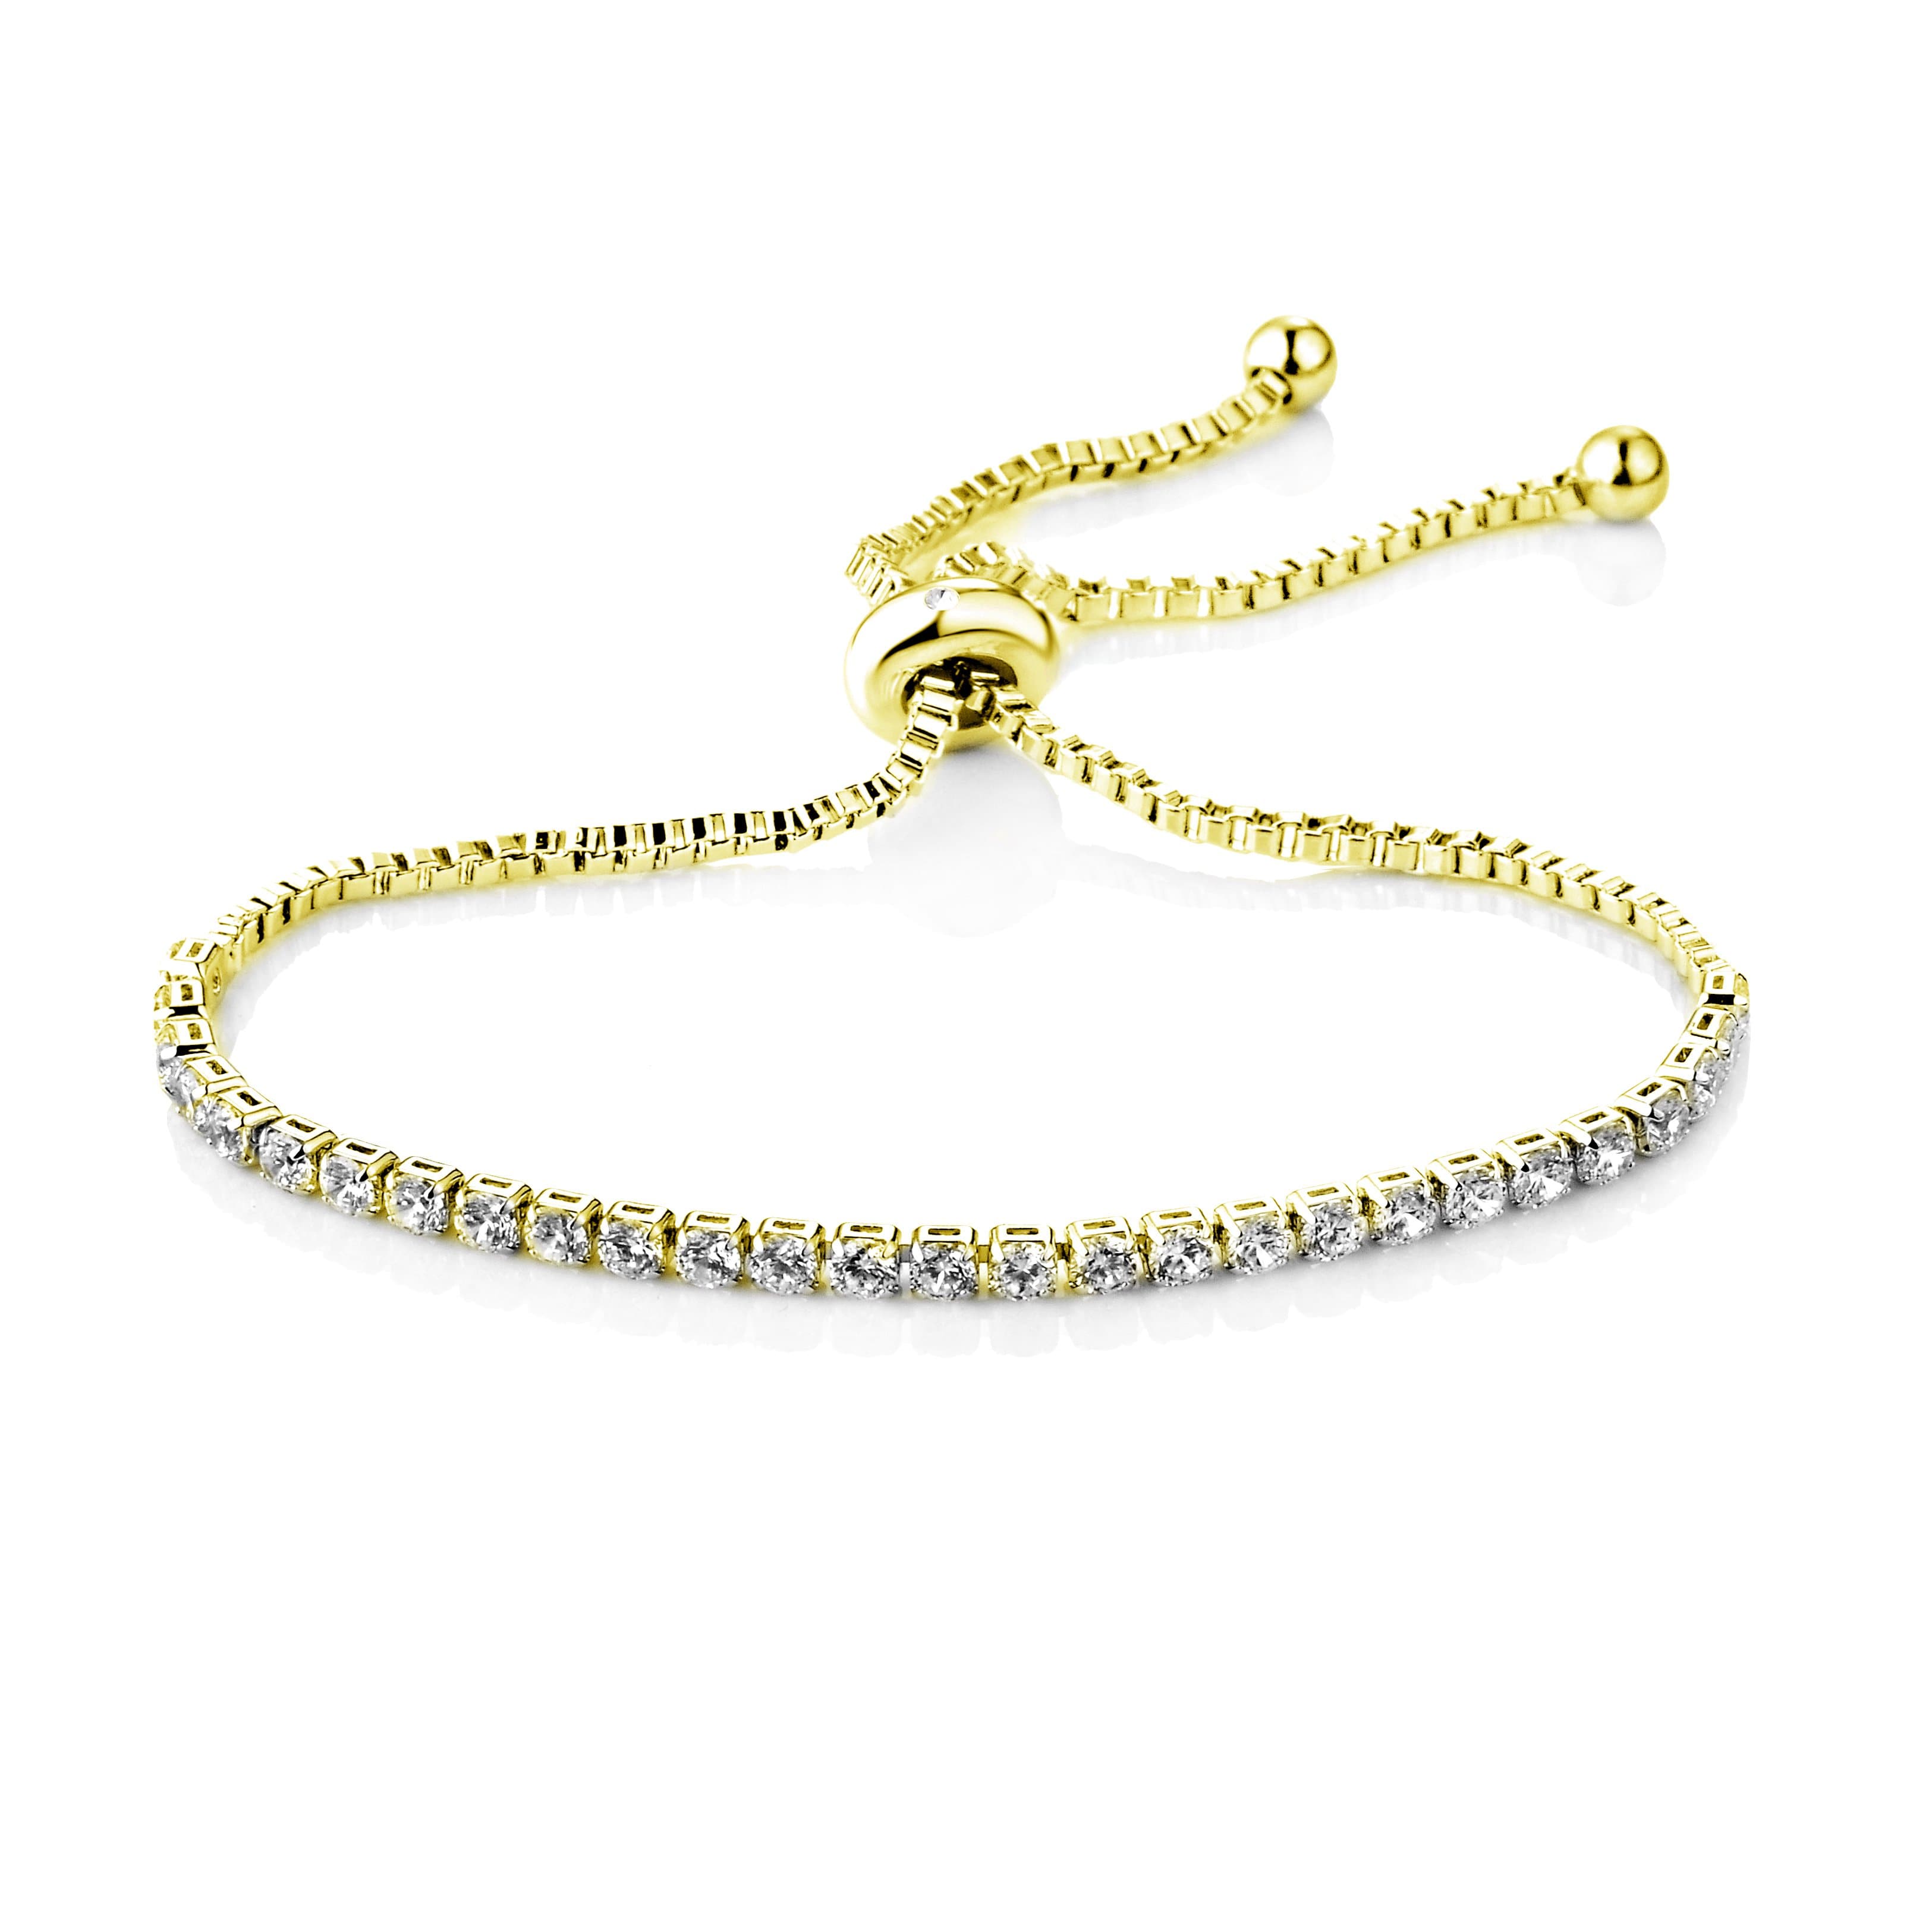 Gold Plated Solitaire Friendship Bracelet Created with Zircondia® Crystals by Philip Jones Jewellery